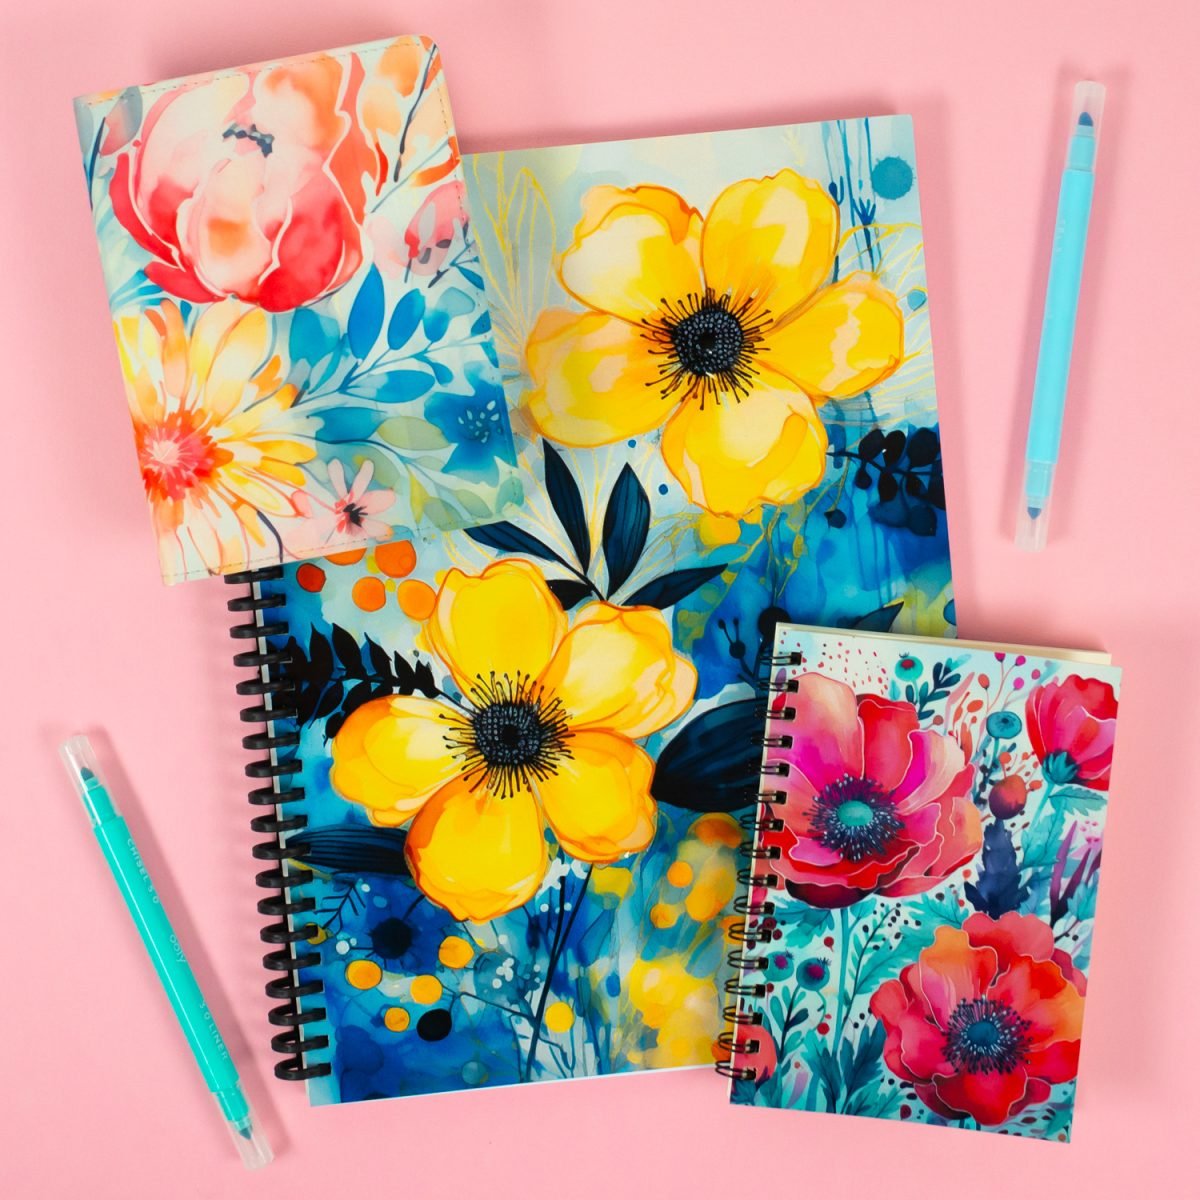 Three sublimation journals on a pink background